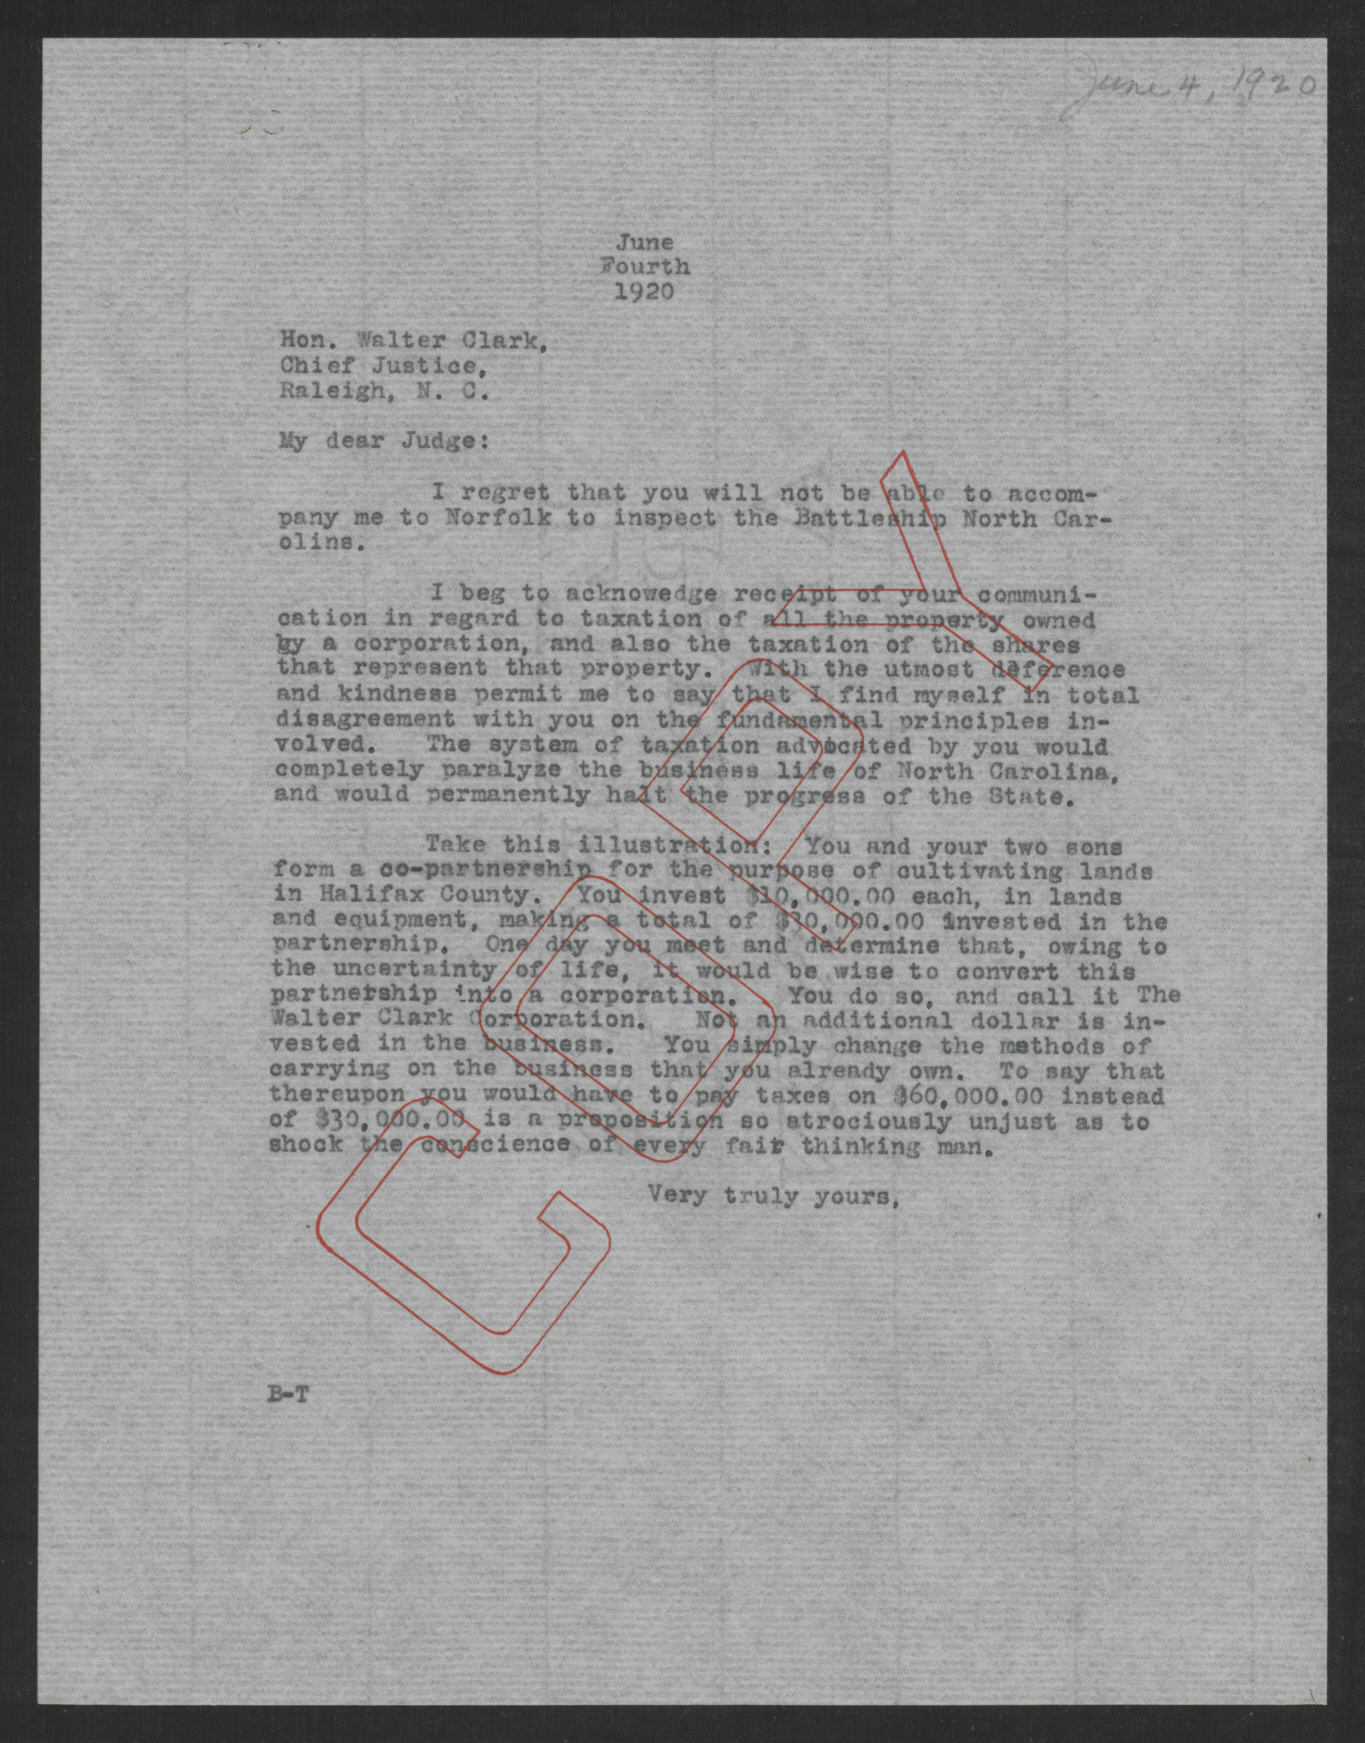 Letter from Thomas W. Bickett to Walter M. Clark, June 4, 1920